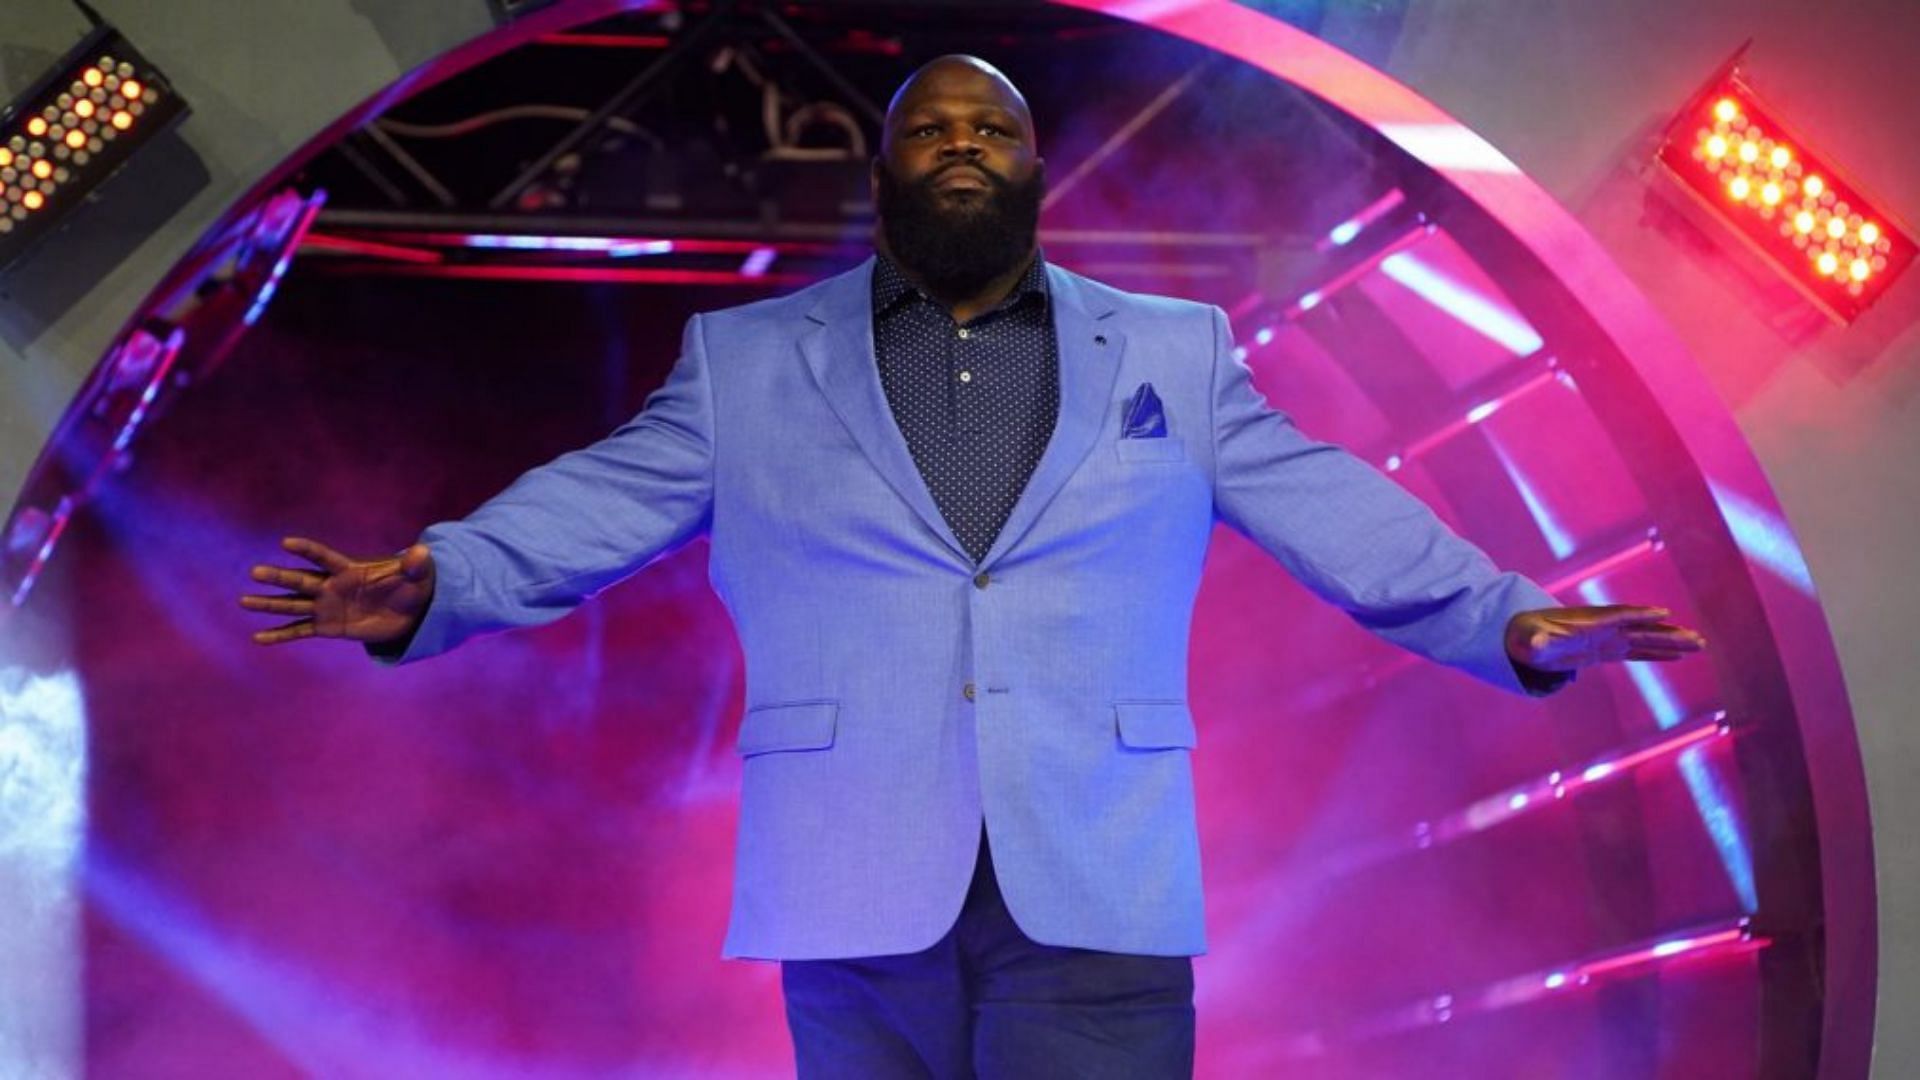 Which AEW star sees Mark Henry as his dad?